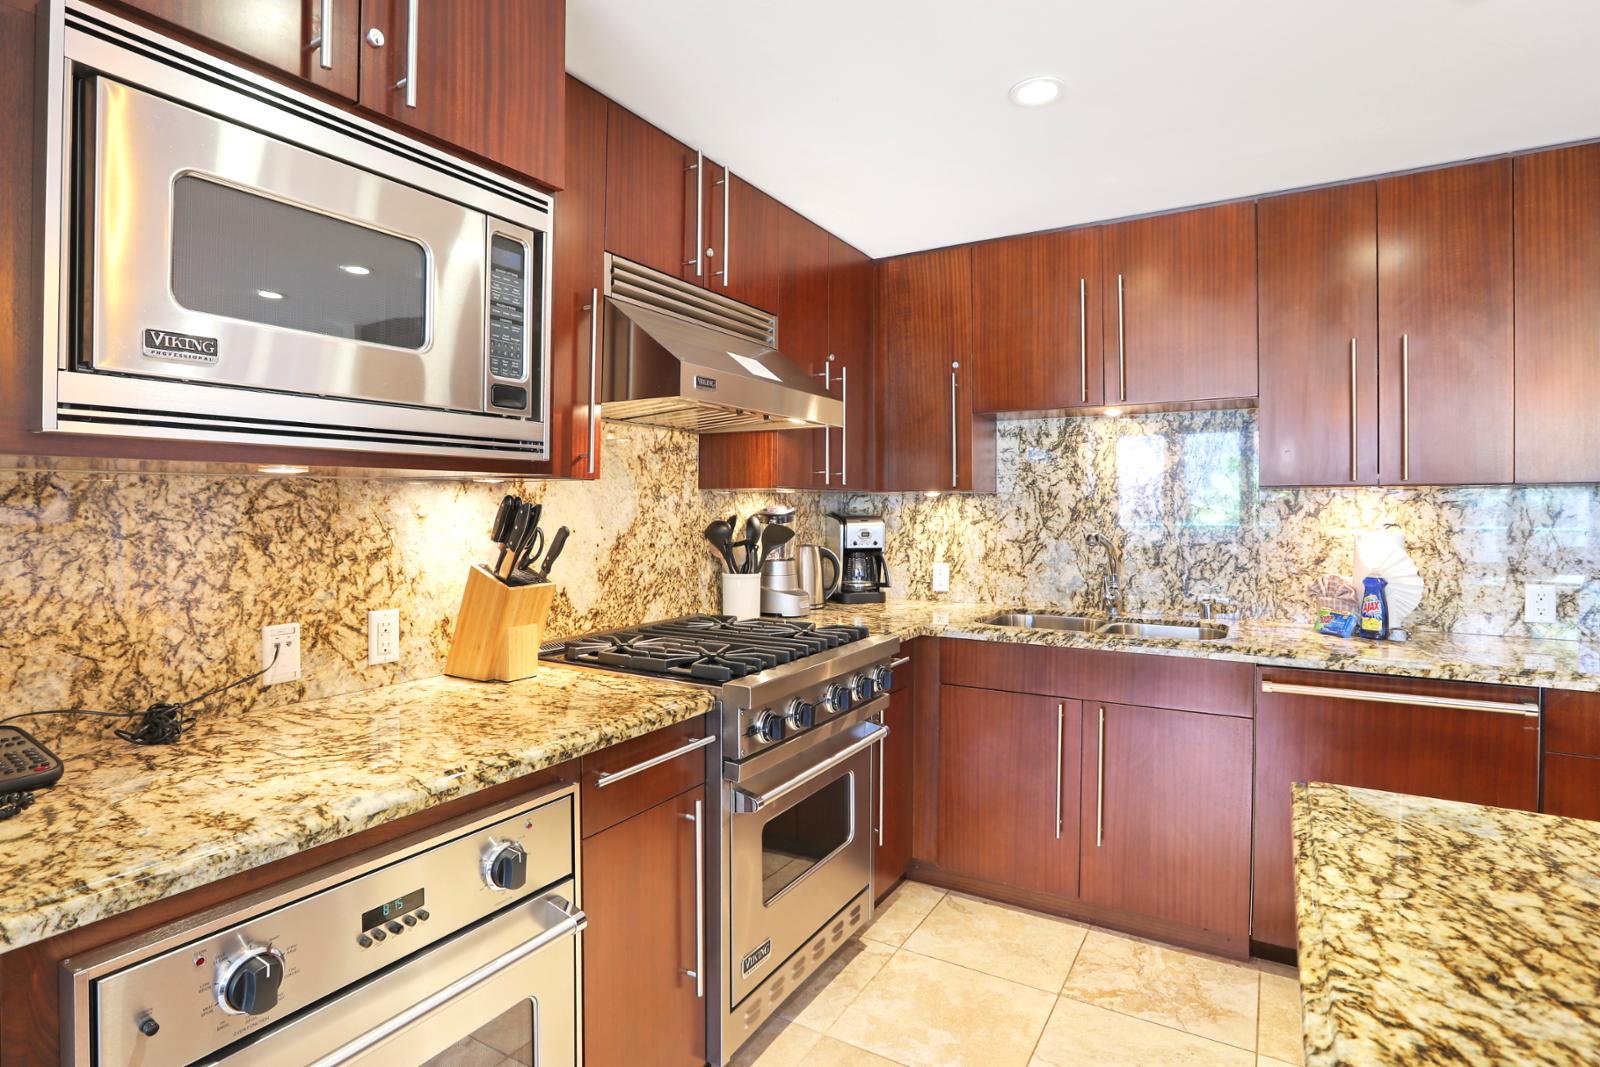 Stainless steel appliances throughout